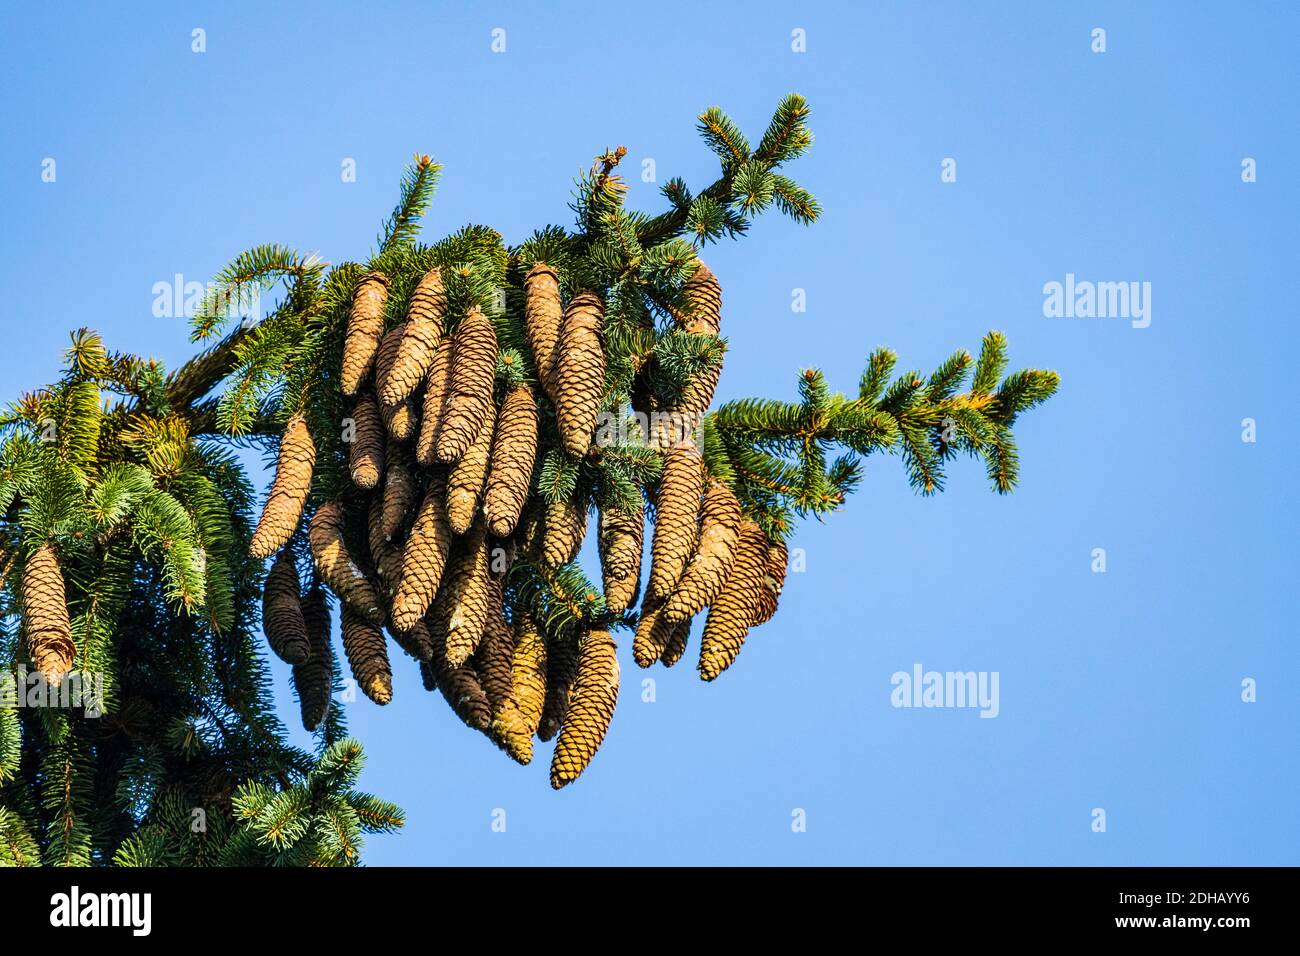 Spruce cones growing on a tree against a blue sky Stock Photo